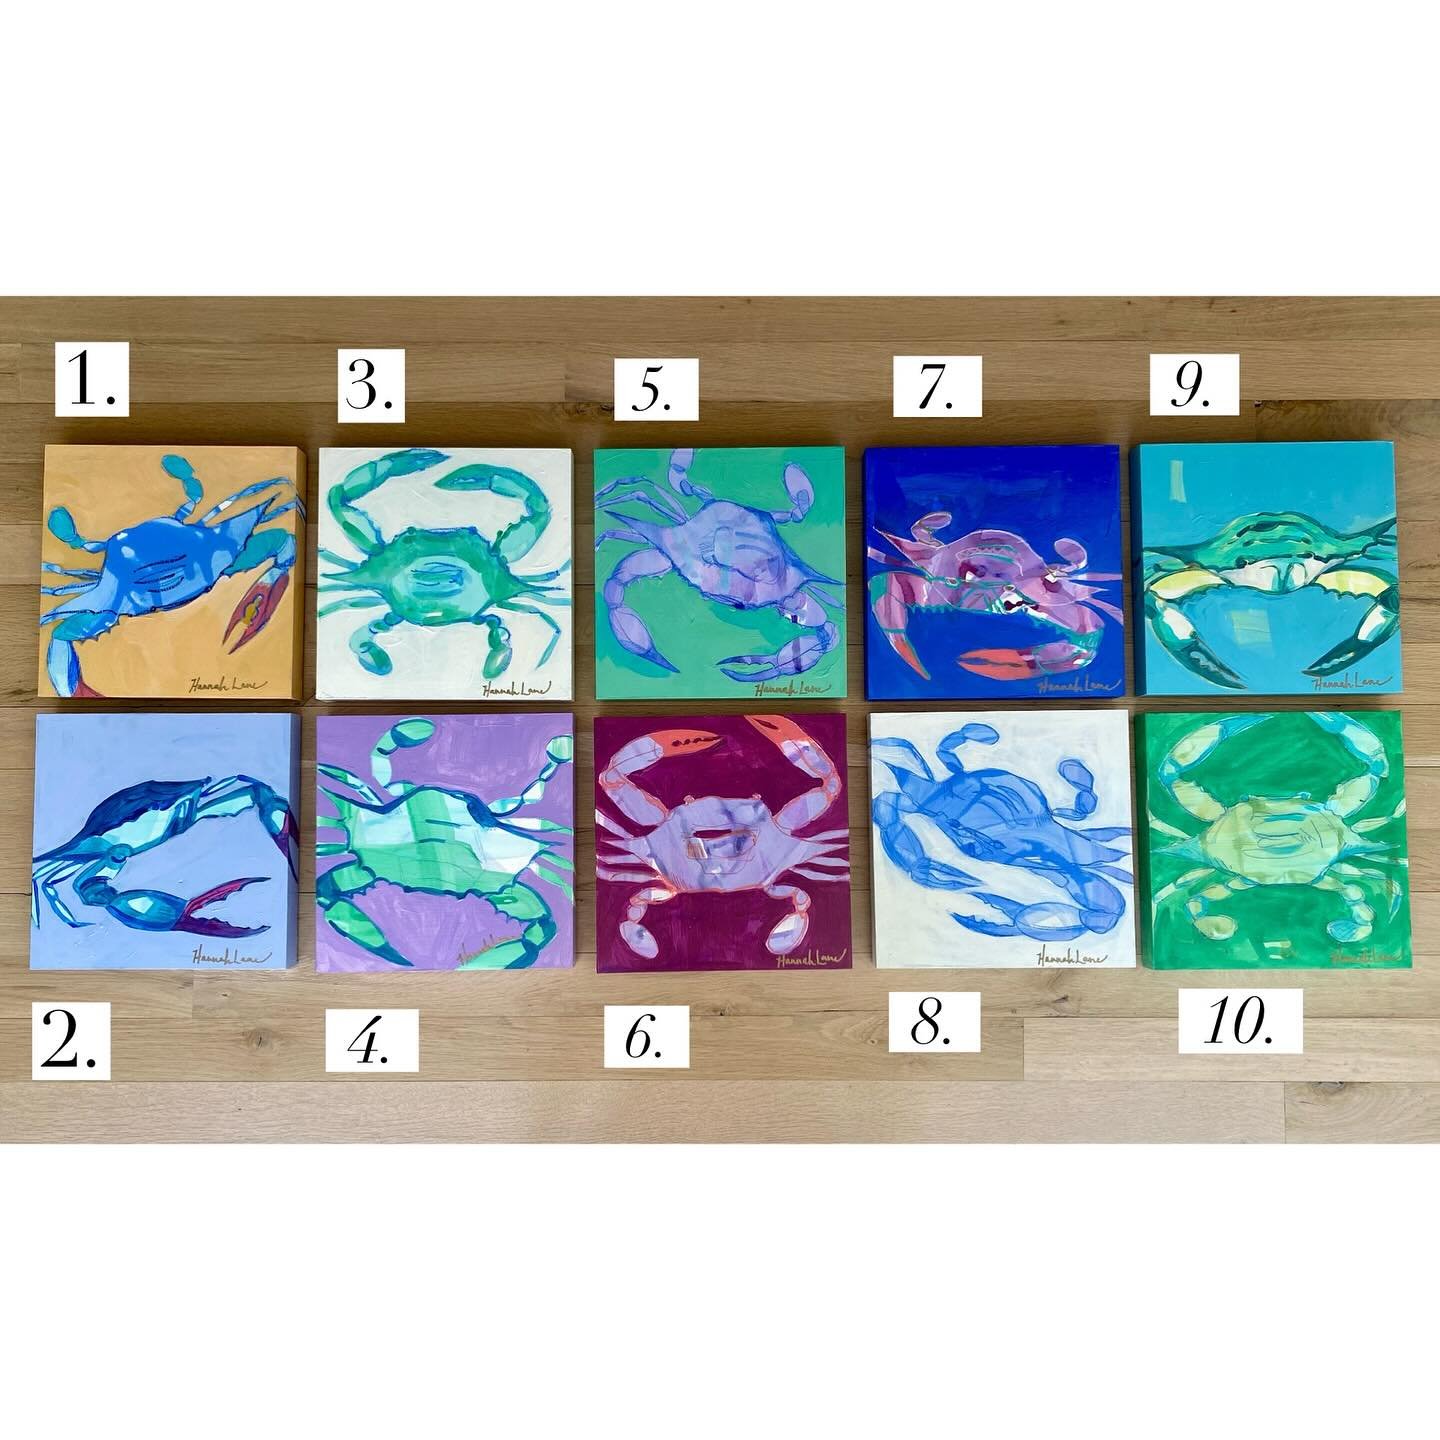 &ldquo;BSL Blue Crabs&rdquo; 🦀 
All sold except 8 &amp; 10
⠀⠀⠀⠀⠀⠀⠀⠀⠀
12x12x1.5 mixed media on gallery wrapped wood panel. $300 each. Please comment # (s) + &ldquo;SOLD&rdquo; in the comment feed &amp; DM me your email address. You will receive a pay